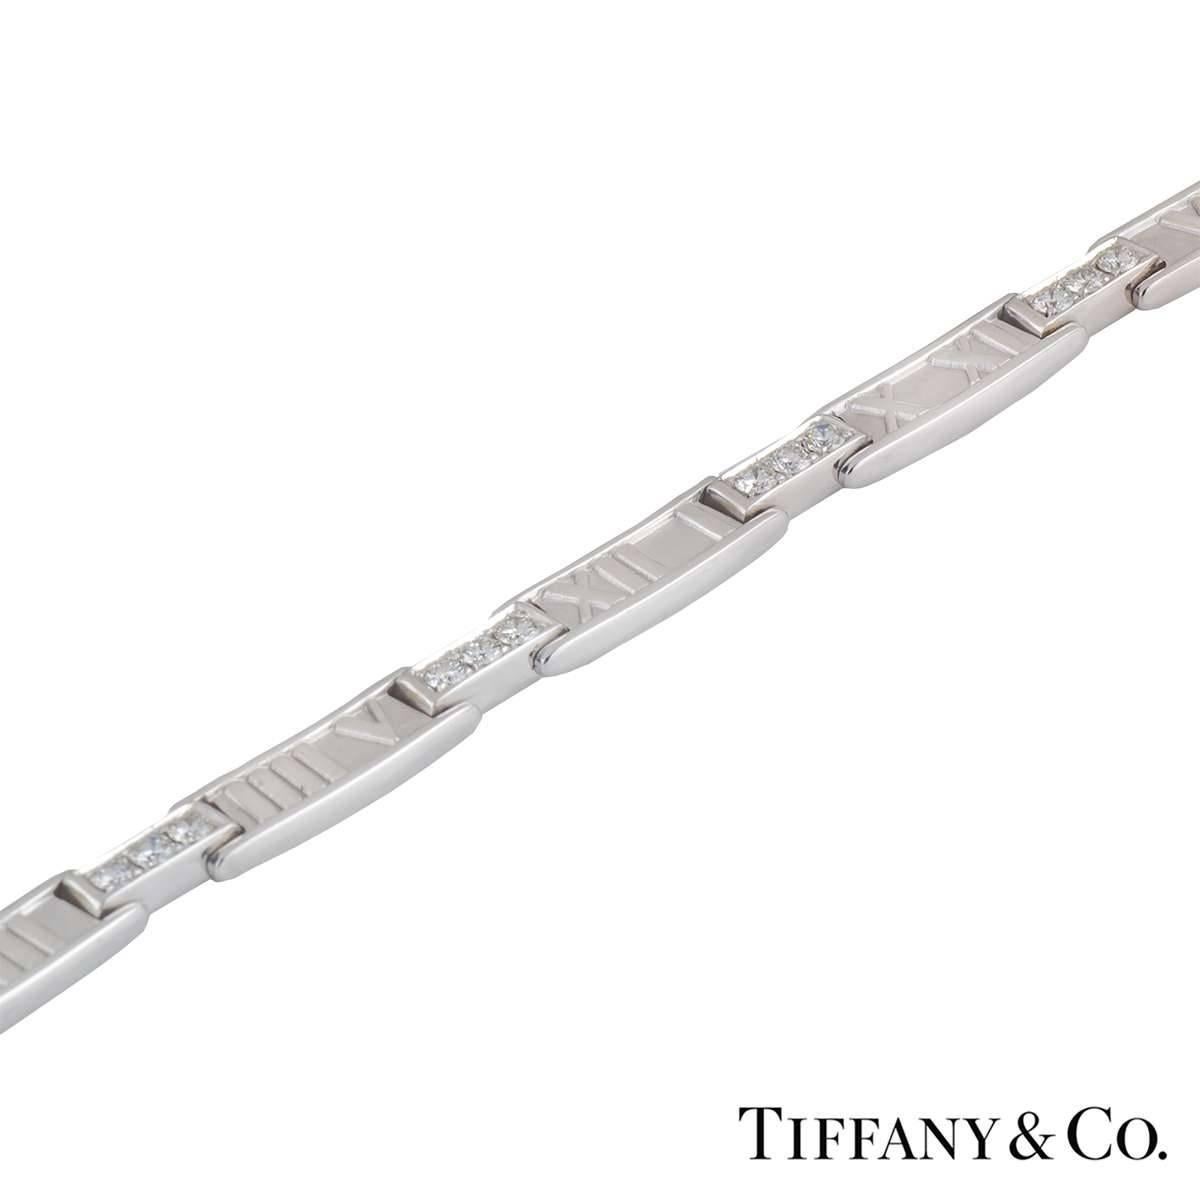 An 18k white gold and diamond Tiffany & Co necklace from the Atlas collection. The necklace features the atlas motif alternating with plain white gold bars half way down, the other half has 3 round brilliant cut diamonds in a pave setting with an